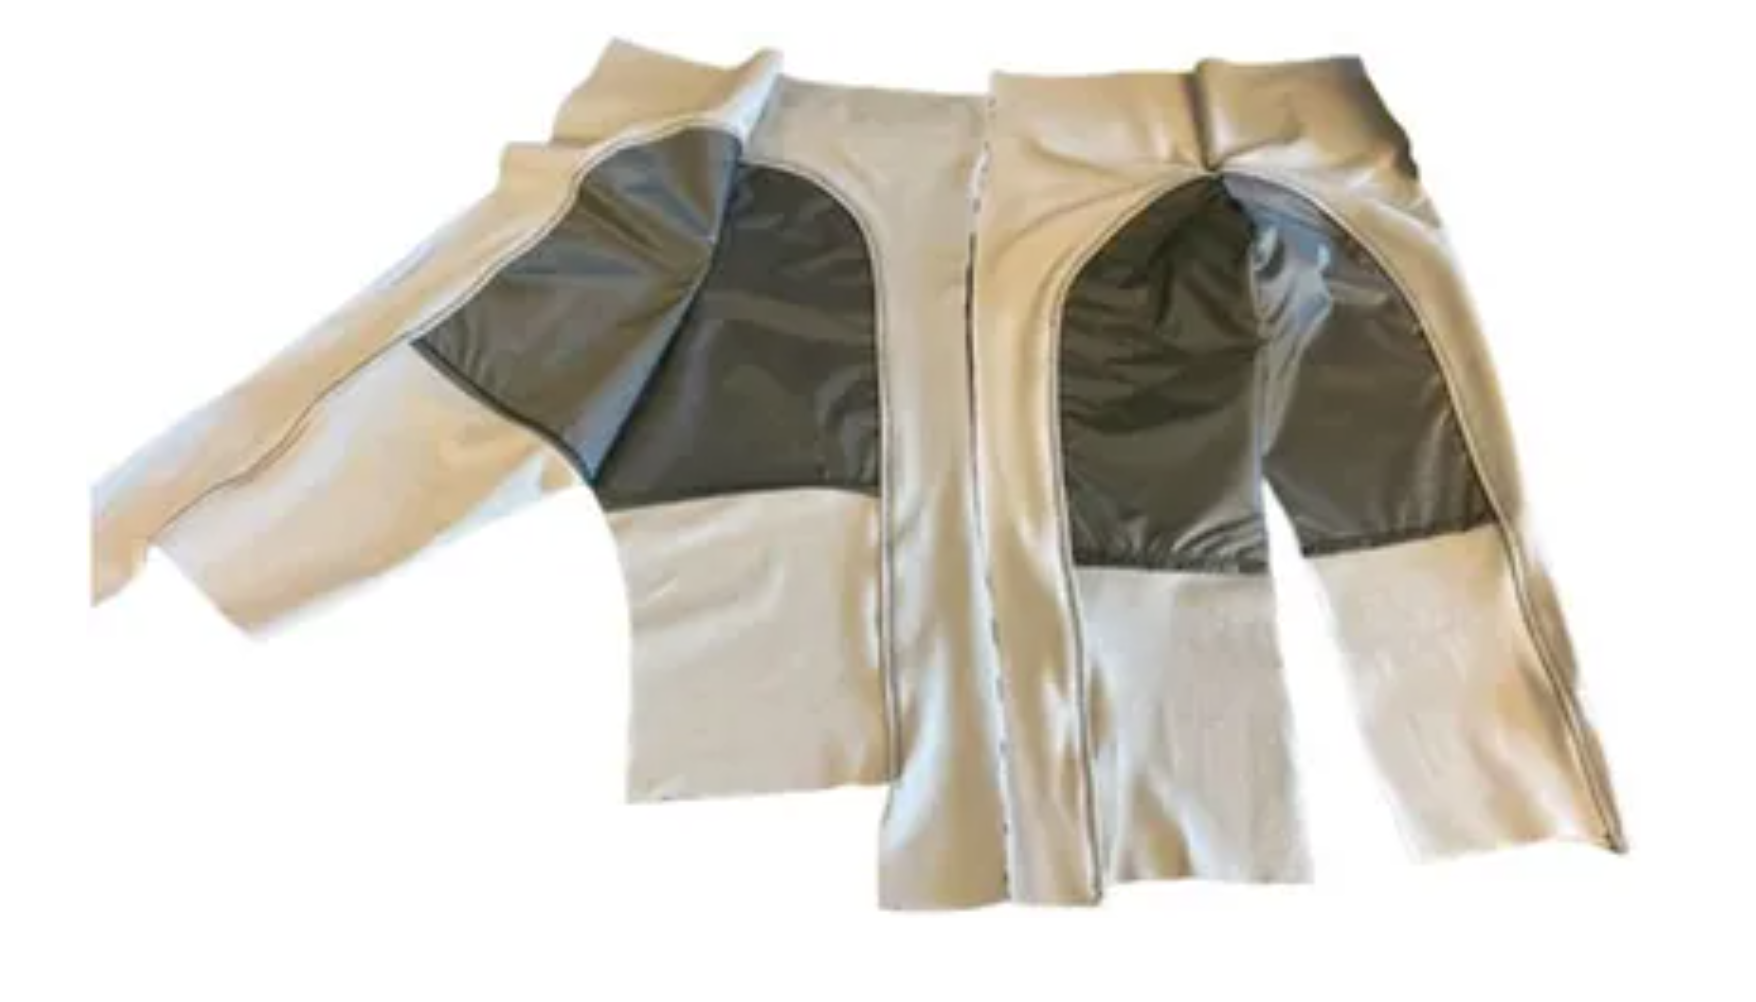 A prototype of the urine collection garment that could be worn by astronauts on future space walks